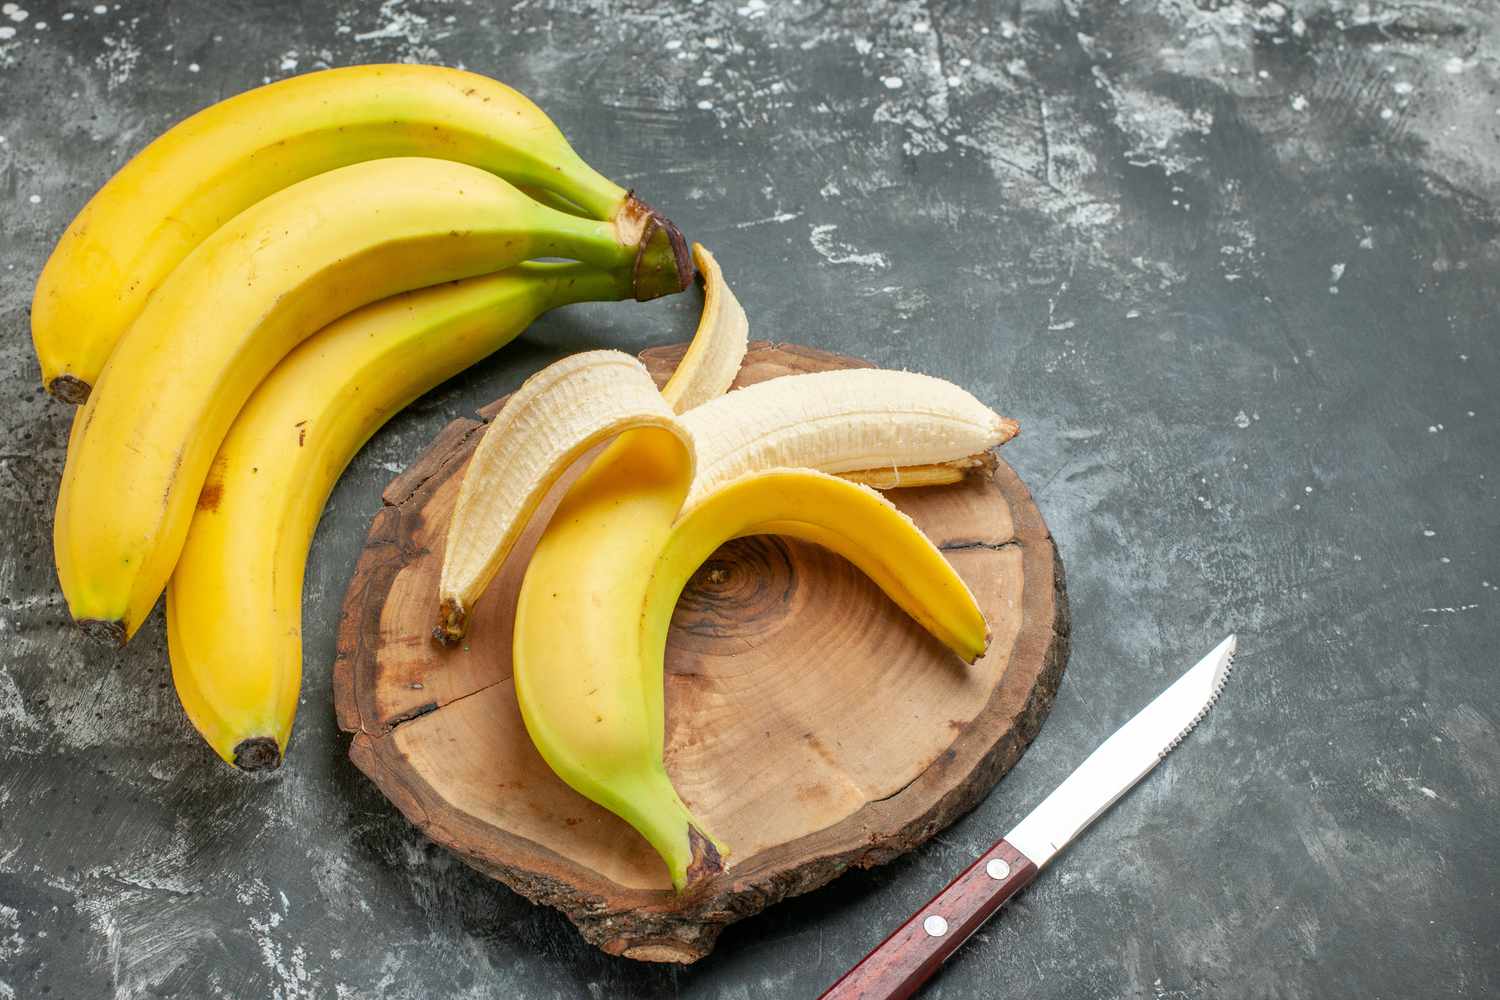 35 interesting facts about banana